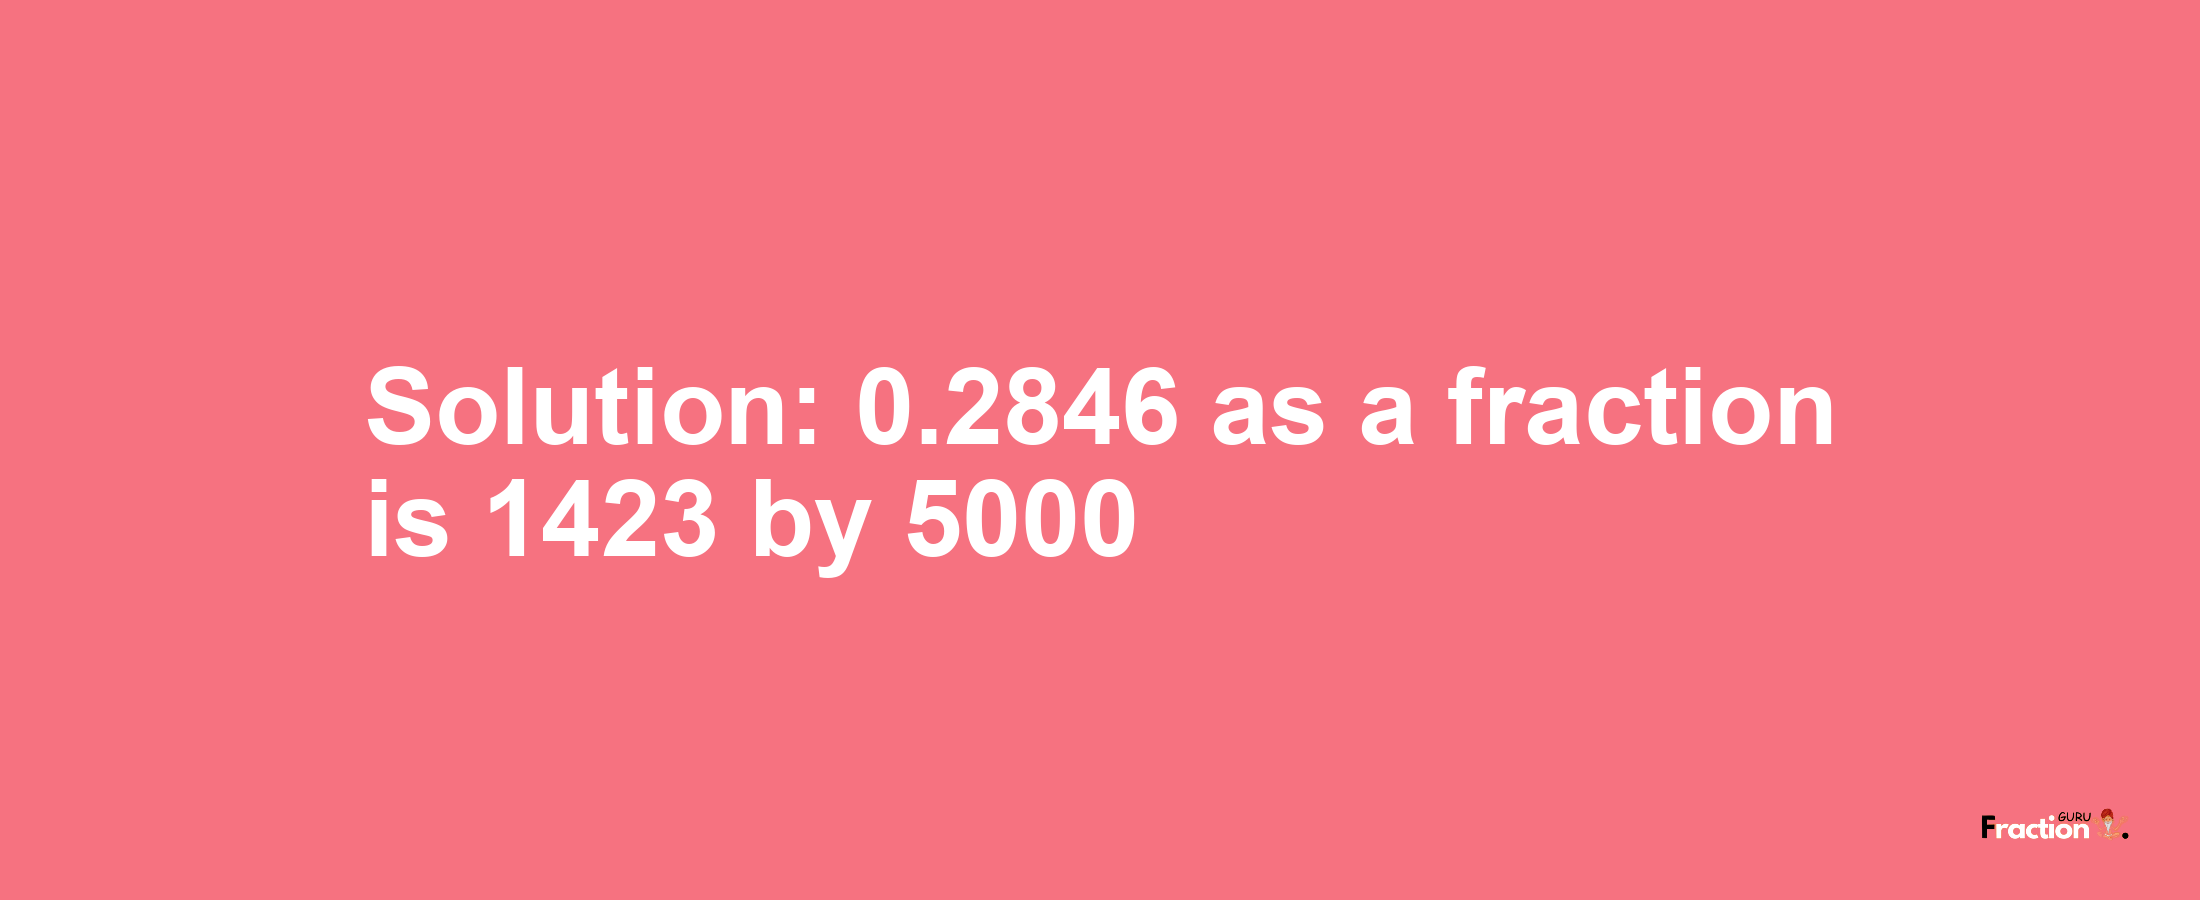 Solution:0.2846 as a fraction is 1423/5000